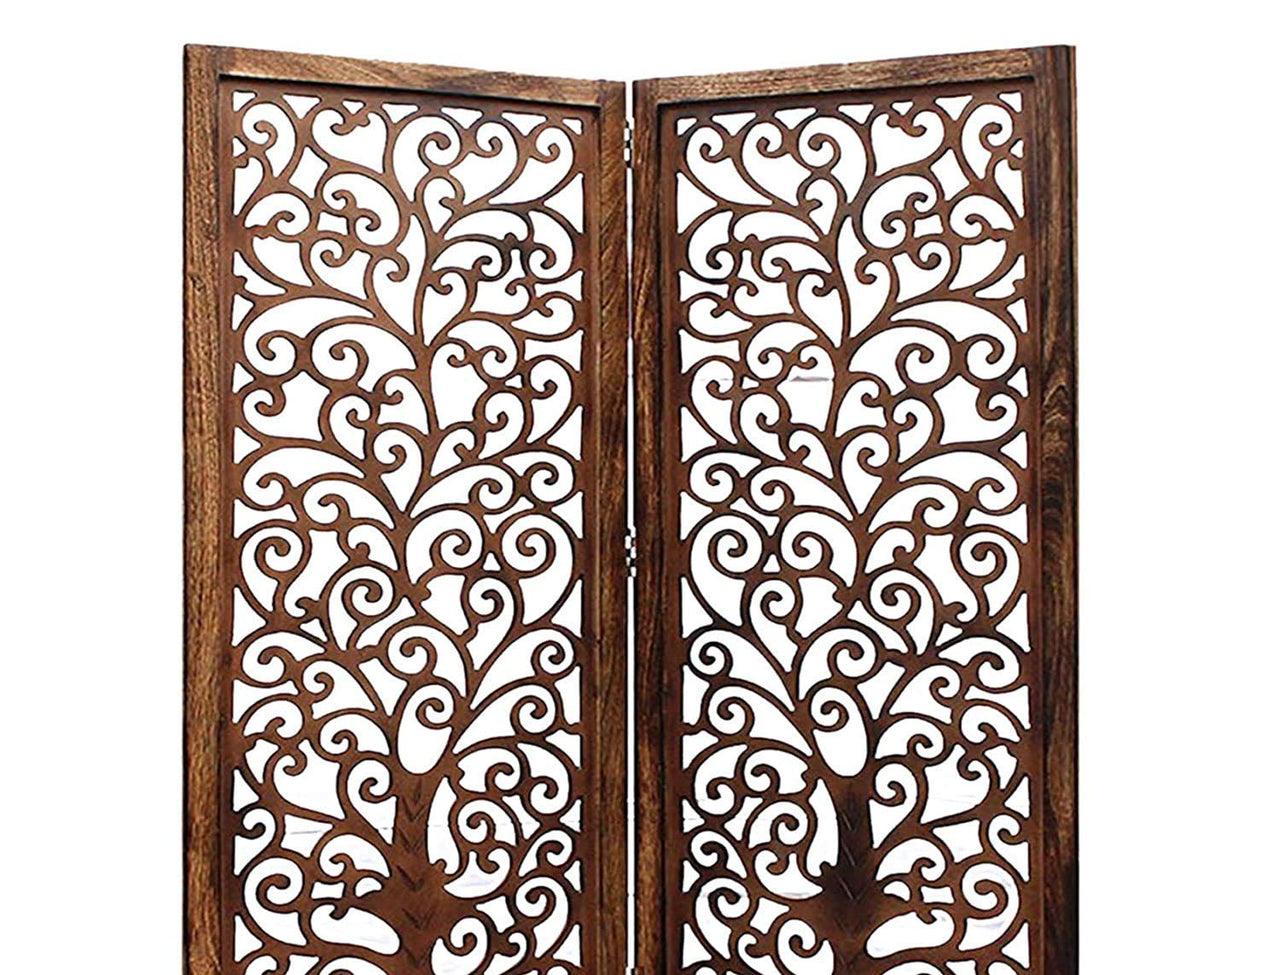 Folding Room Wooden Partition | Wall Screen Room Decor | Room Separator | Partition Curtains for Hall Room Divider Dime Store